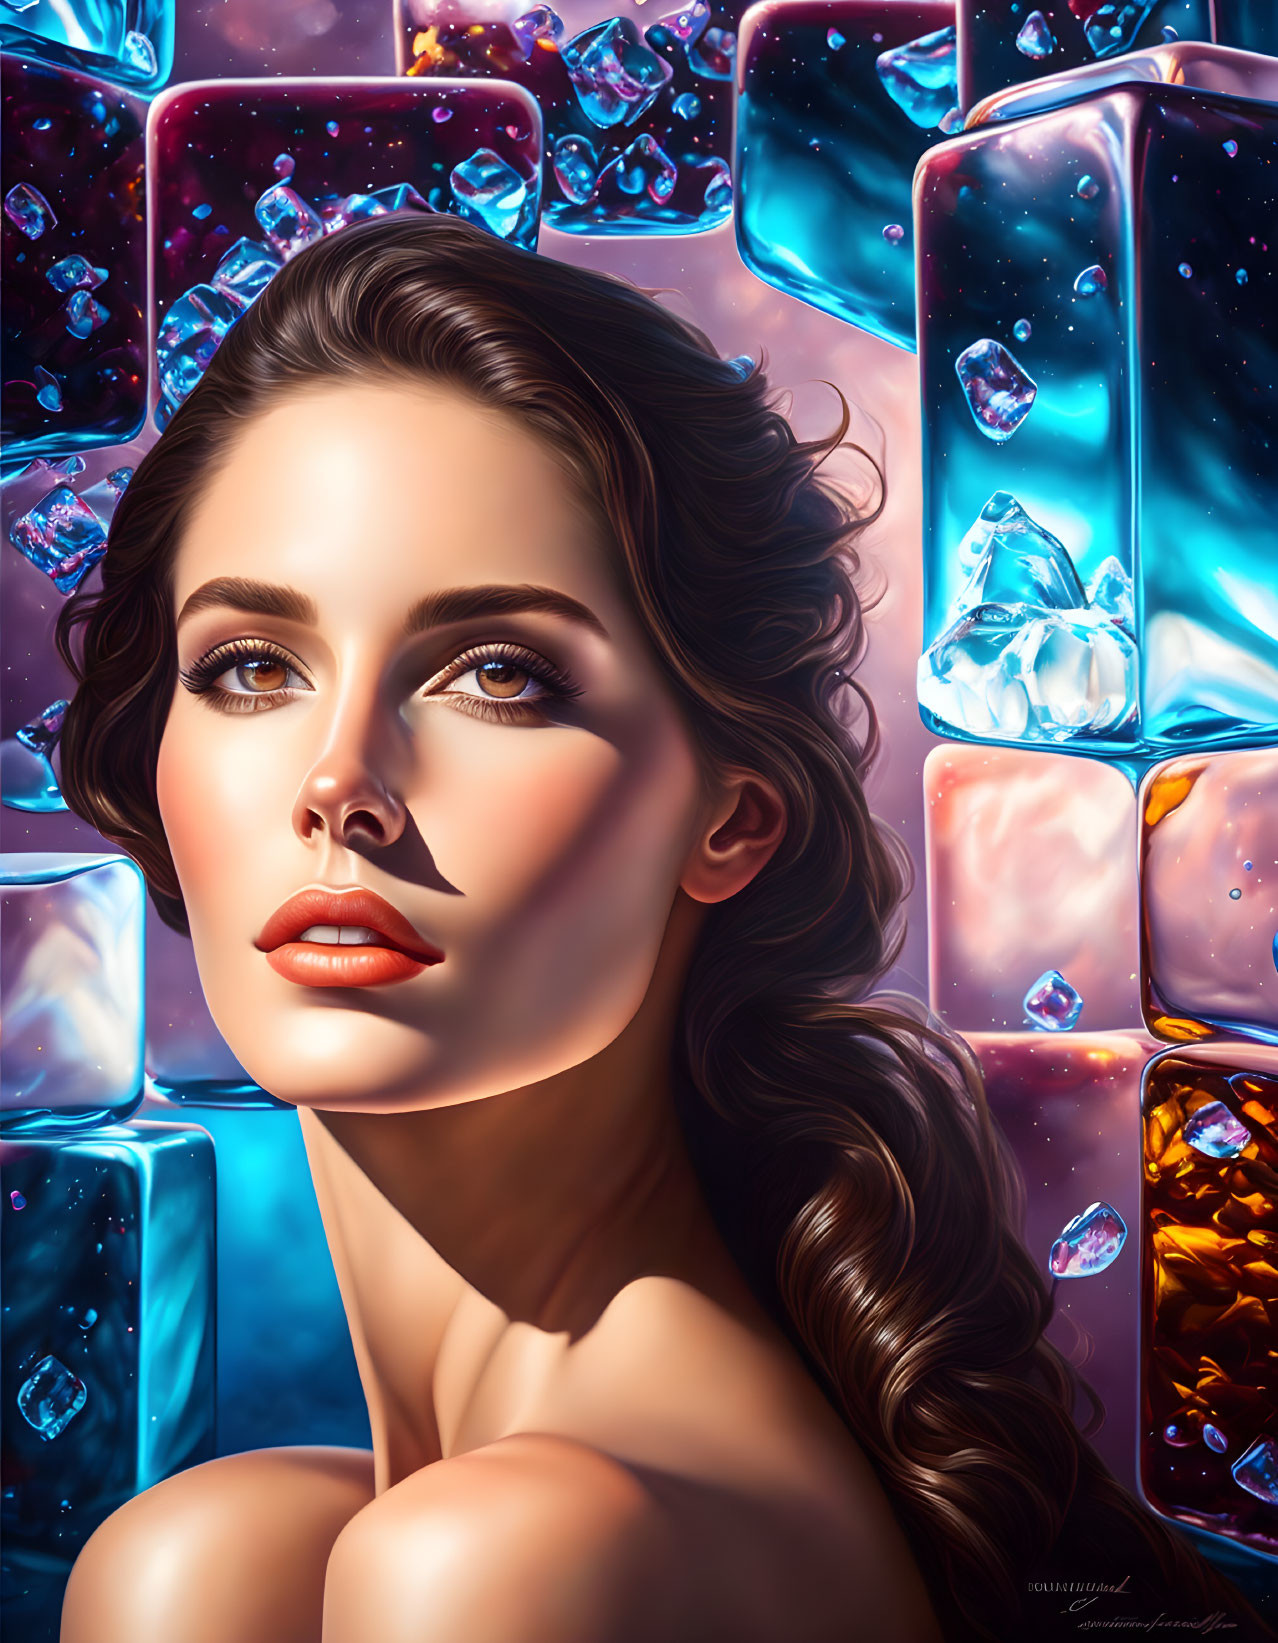 Vibrant digital portrait of a woman with colorful ice cubes and bubbles